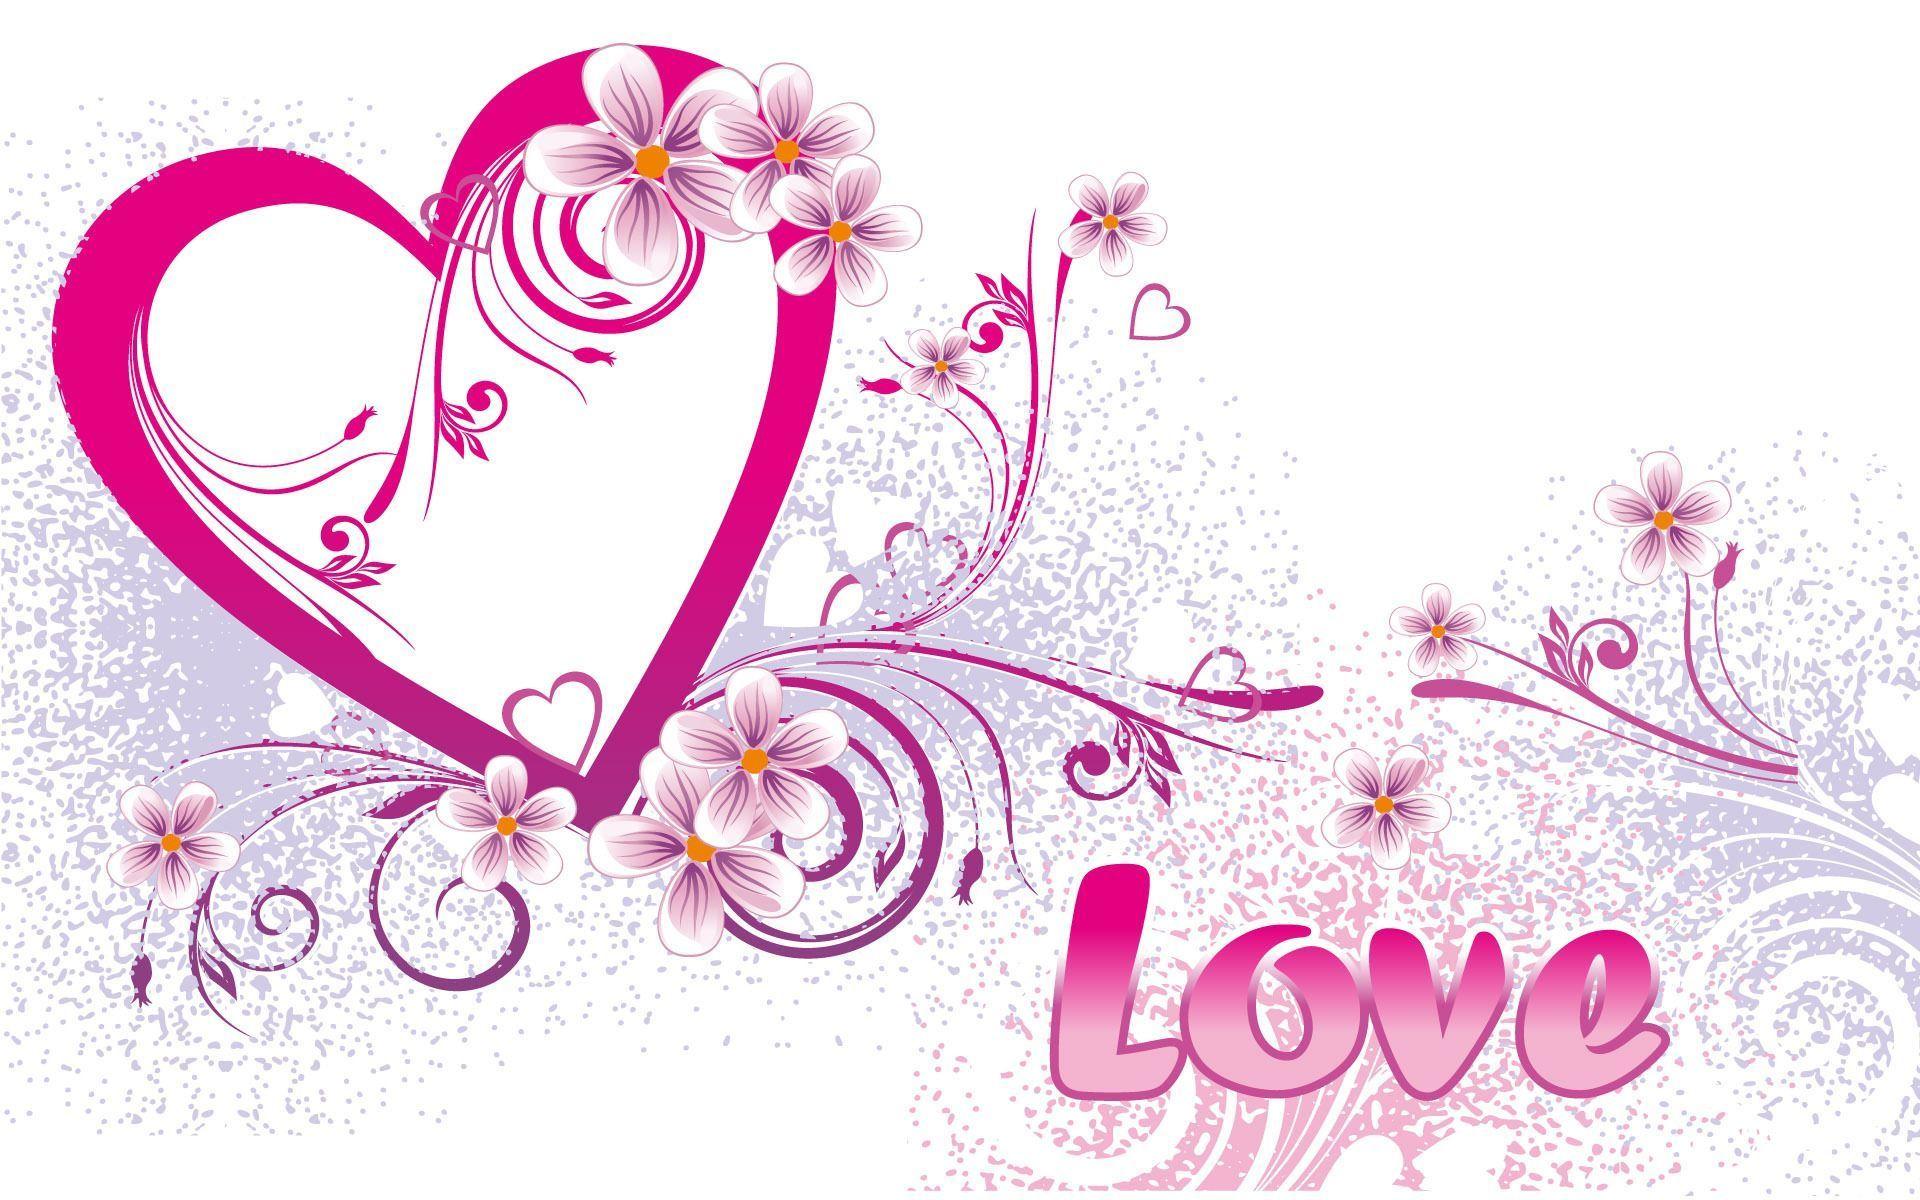 Love image Love wallpaper HD wallpaper and background photo